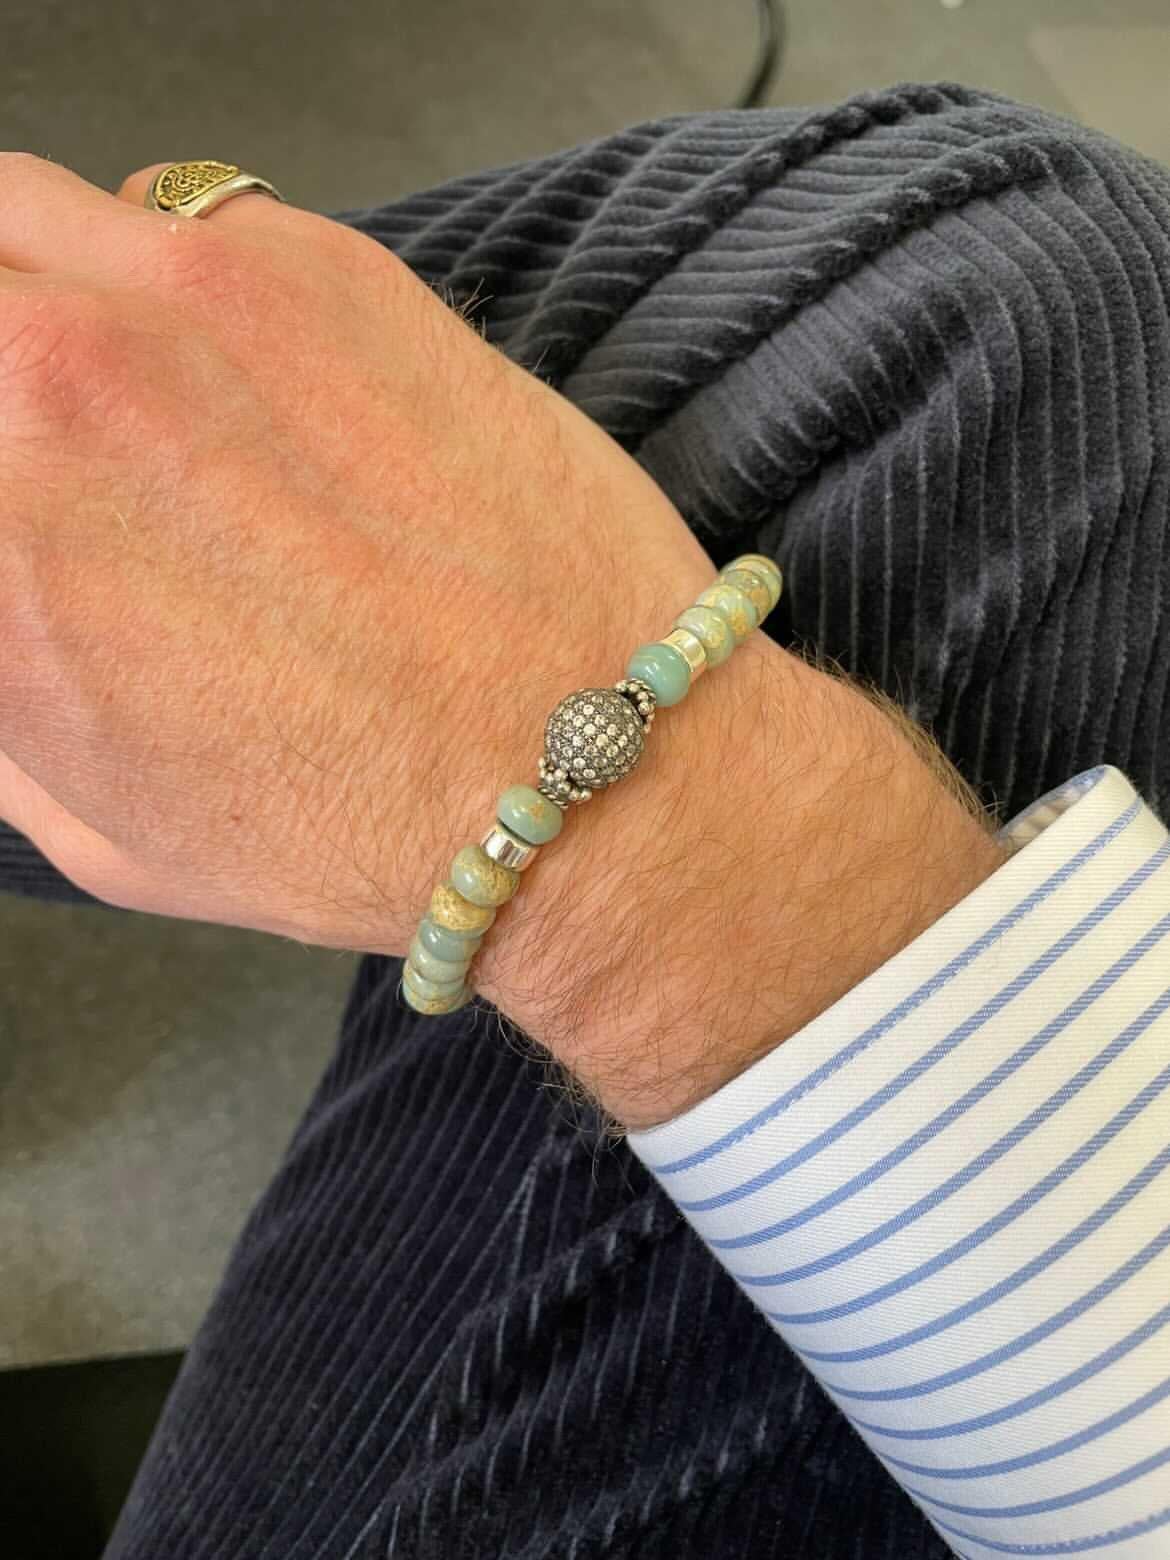 Behind the Jewelry
The Terrace Diamond bracelet is designed with AquaTerra Jasper and adorned with a pave diamond sphere which gives it an exceptional elegance and style.  The stones are rarely seen in men's bracelets.    
Designed and handmade in